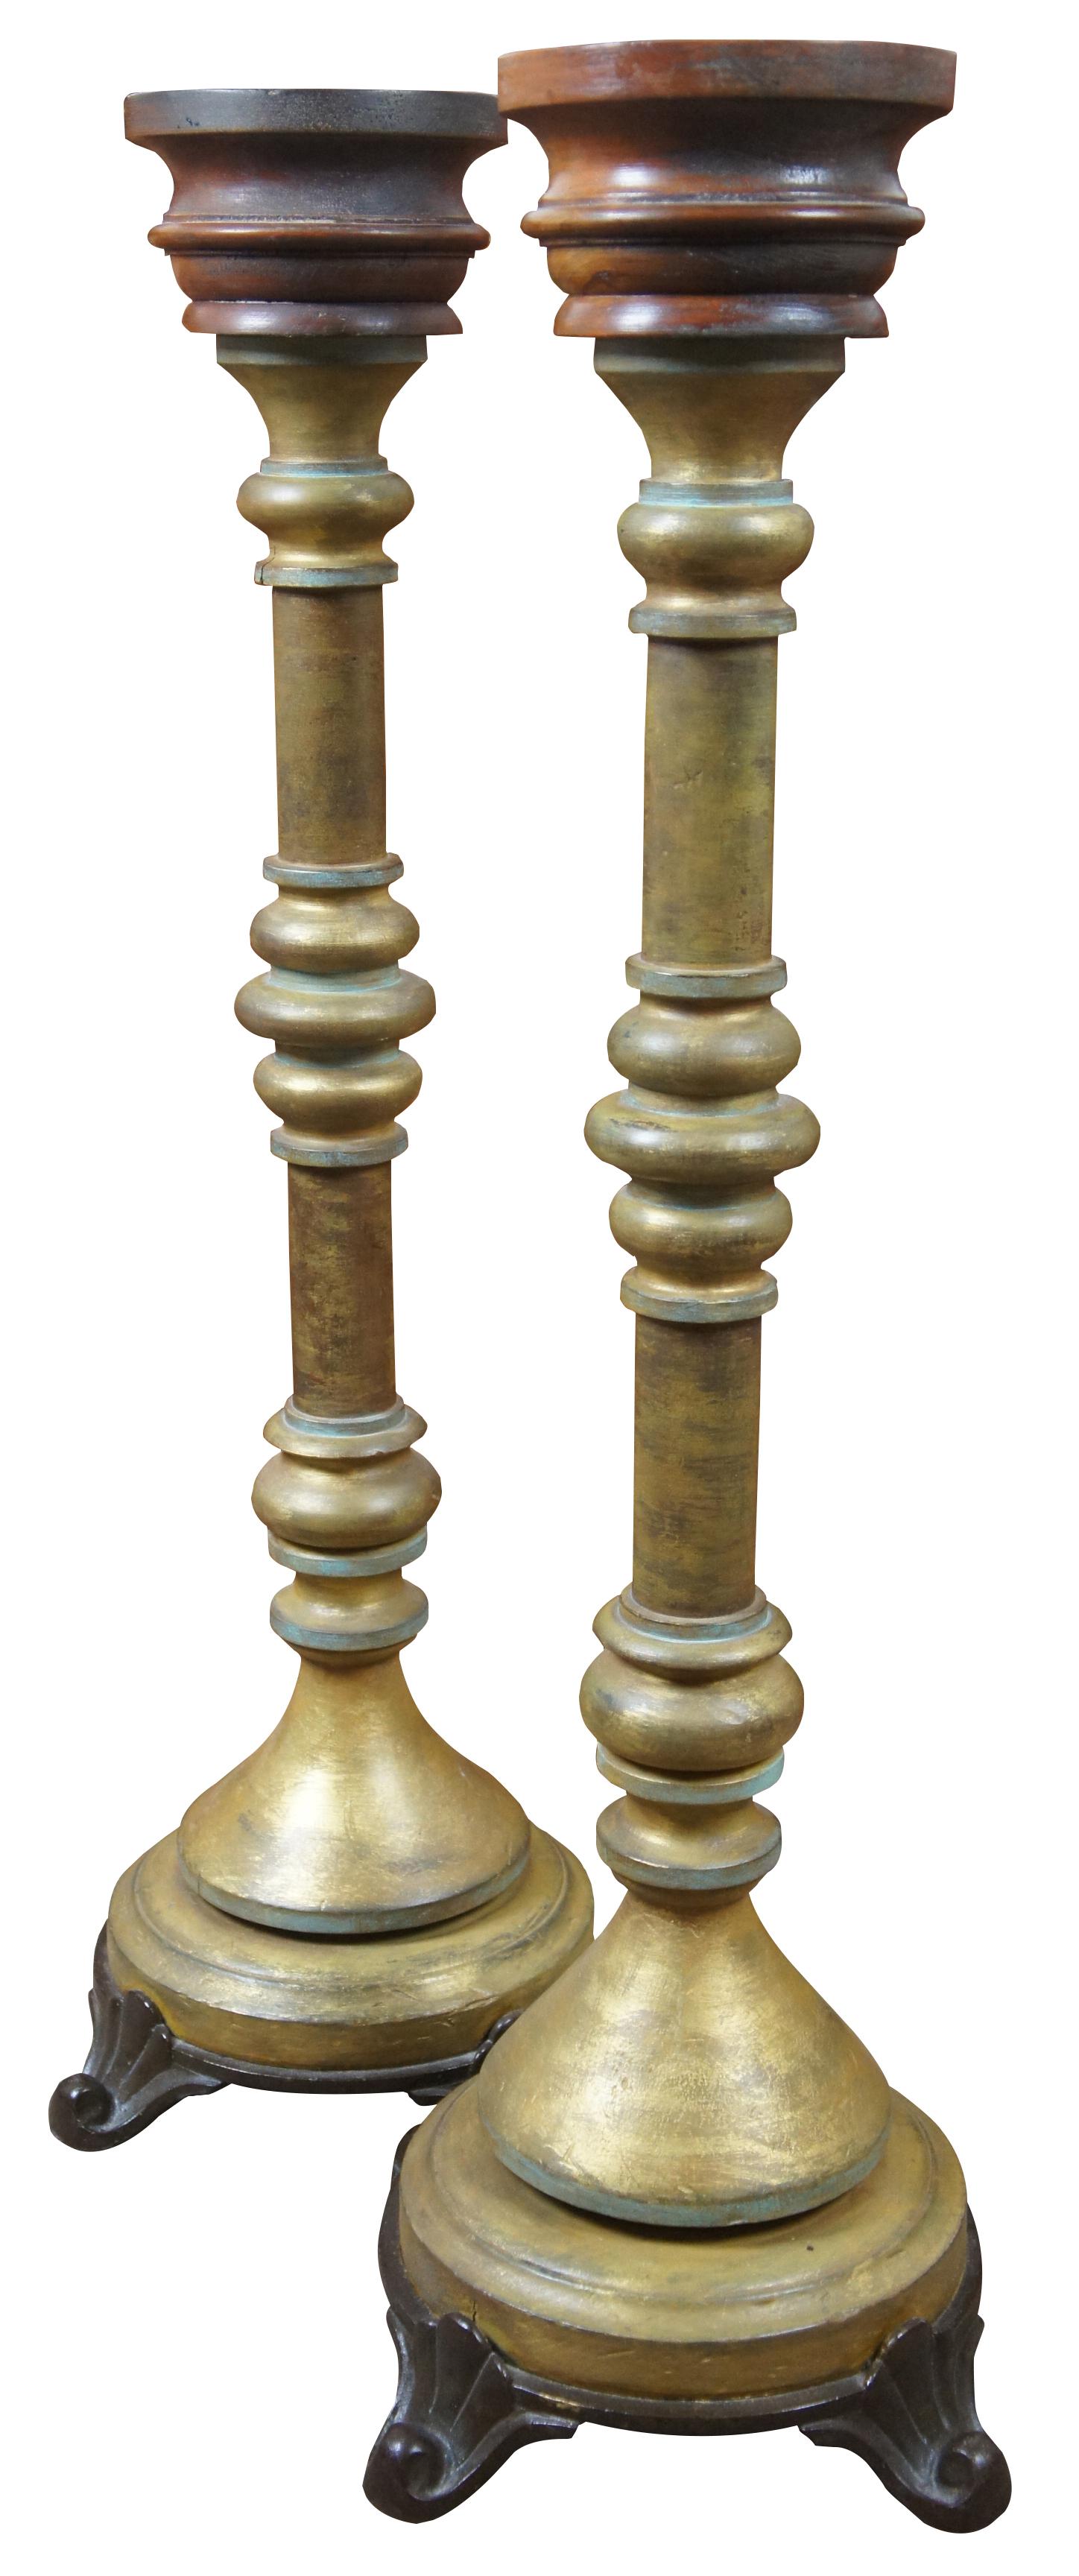 Monumenta pair of 20th century altar candlesticks with iron bases and turned wood pillars, painted to resemble antique patina brass topped with a simple wood drip catcher. Measure: 36